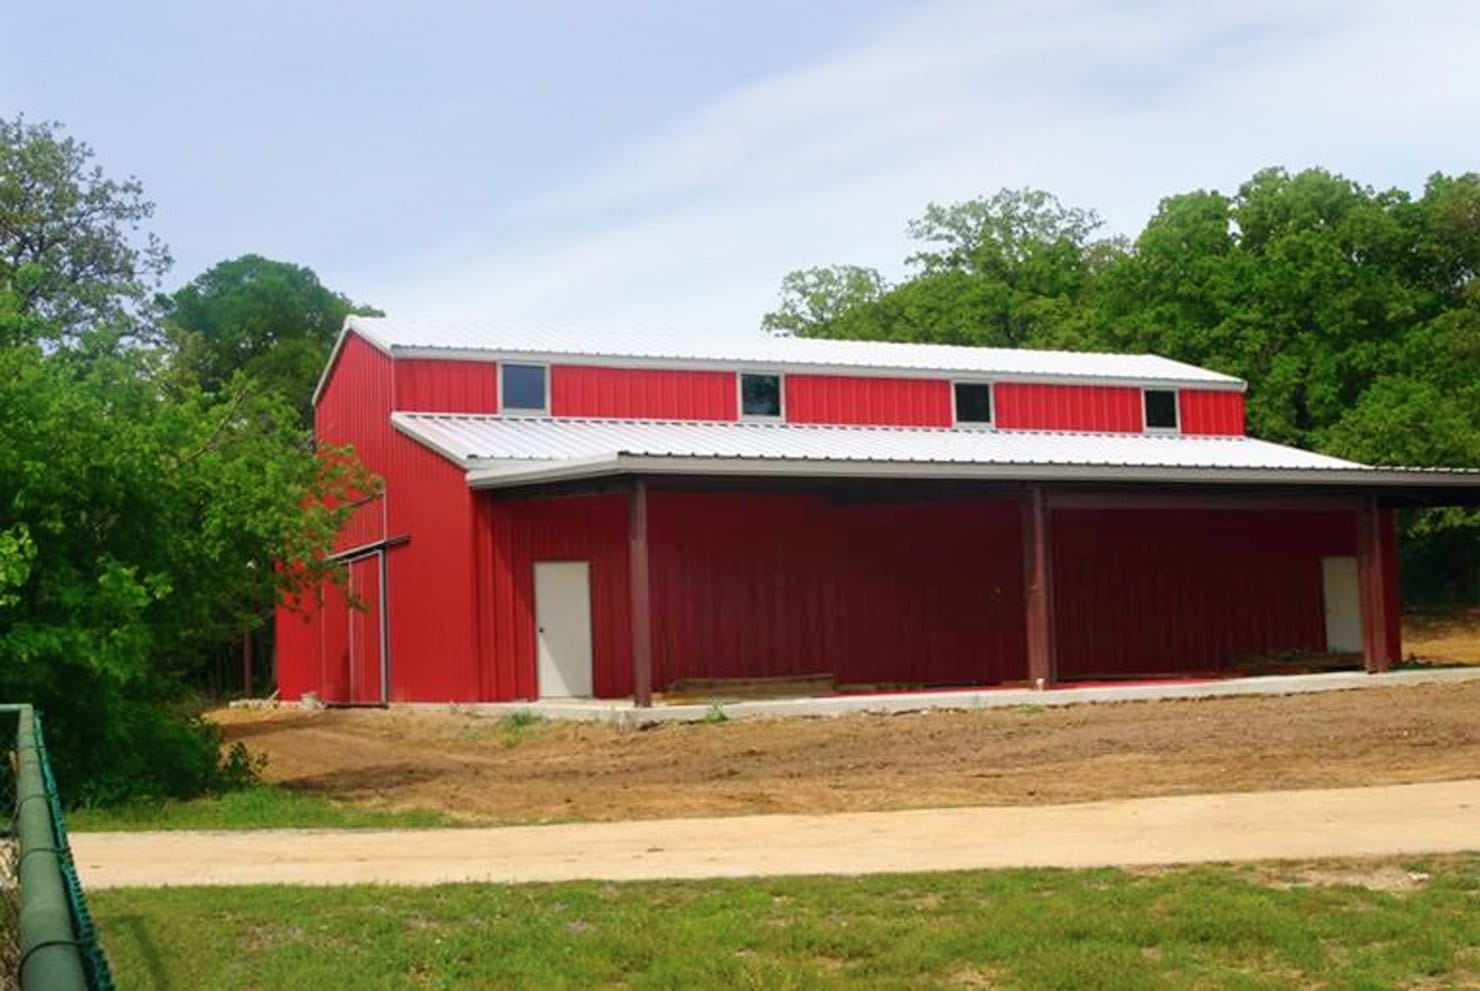 Capital Steel barn's (like the red one pictured here) typically have open floor plans, making them perfect to custom tailor your dream home!